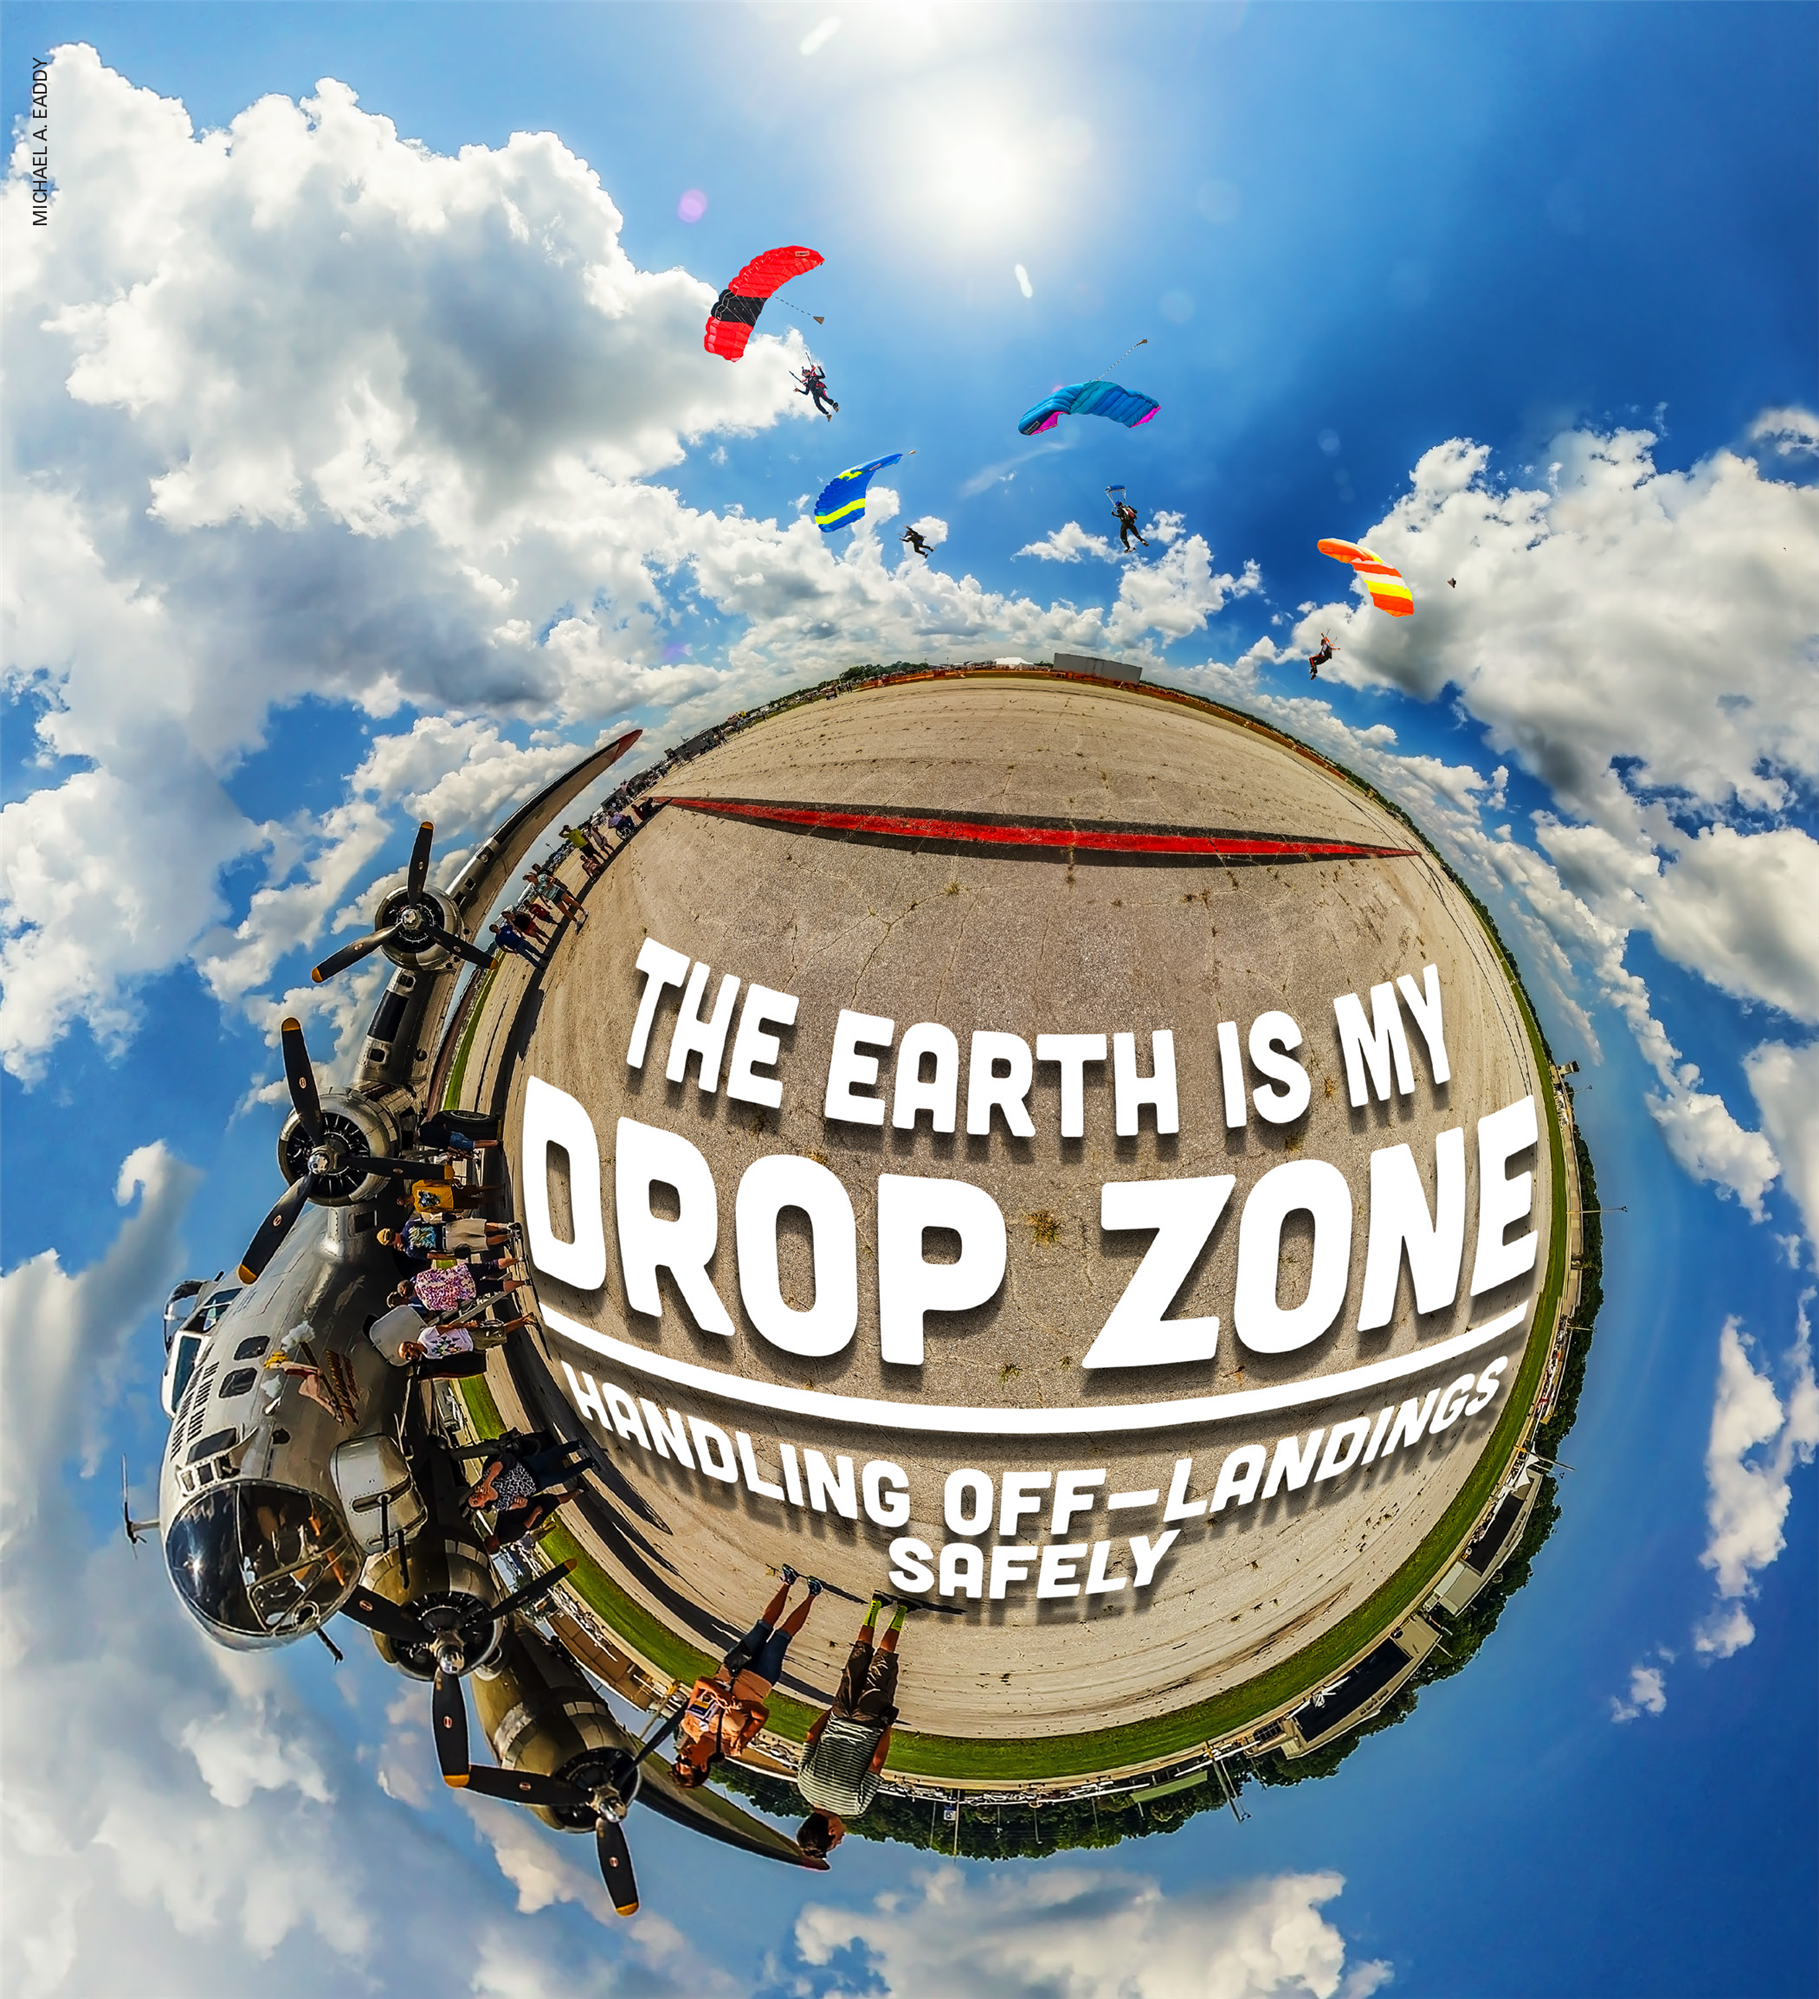 The Earth is My Drop Zone—Handling Off-Landings Safely